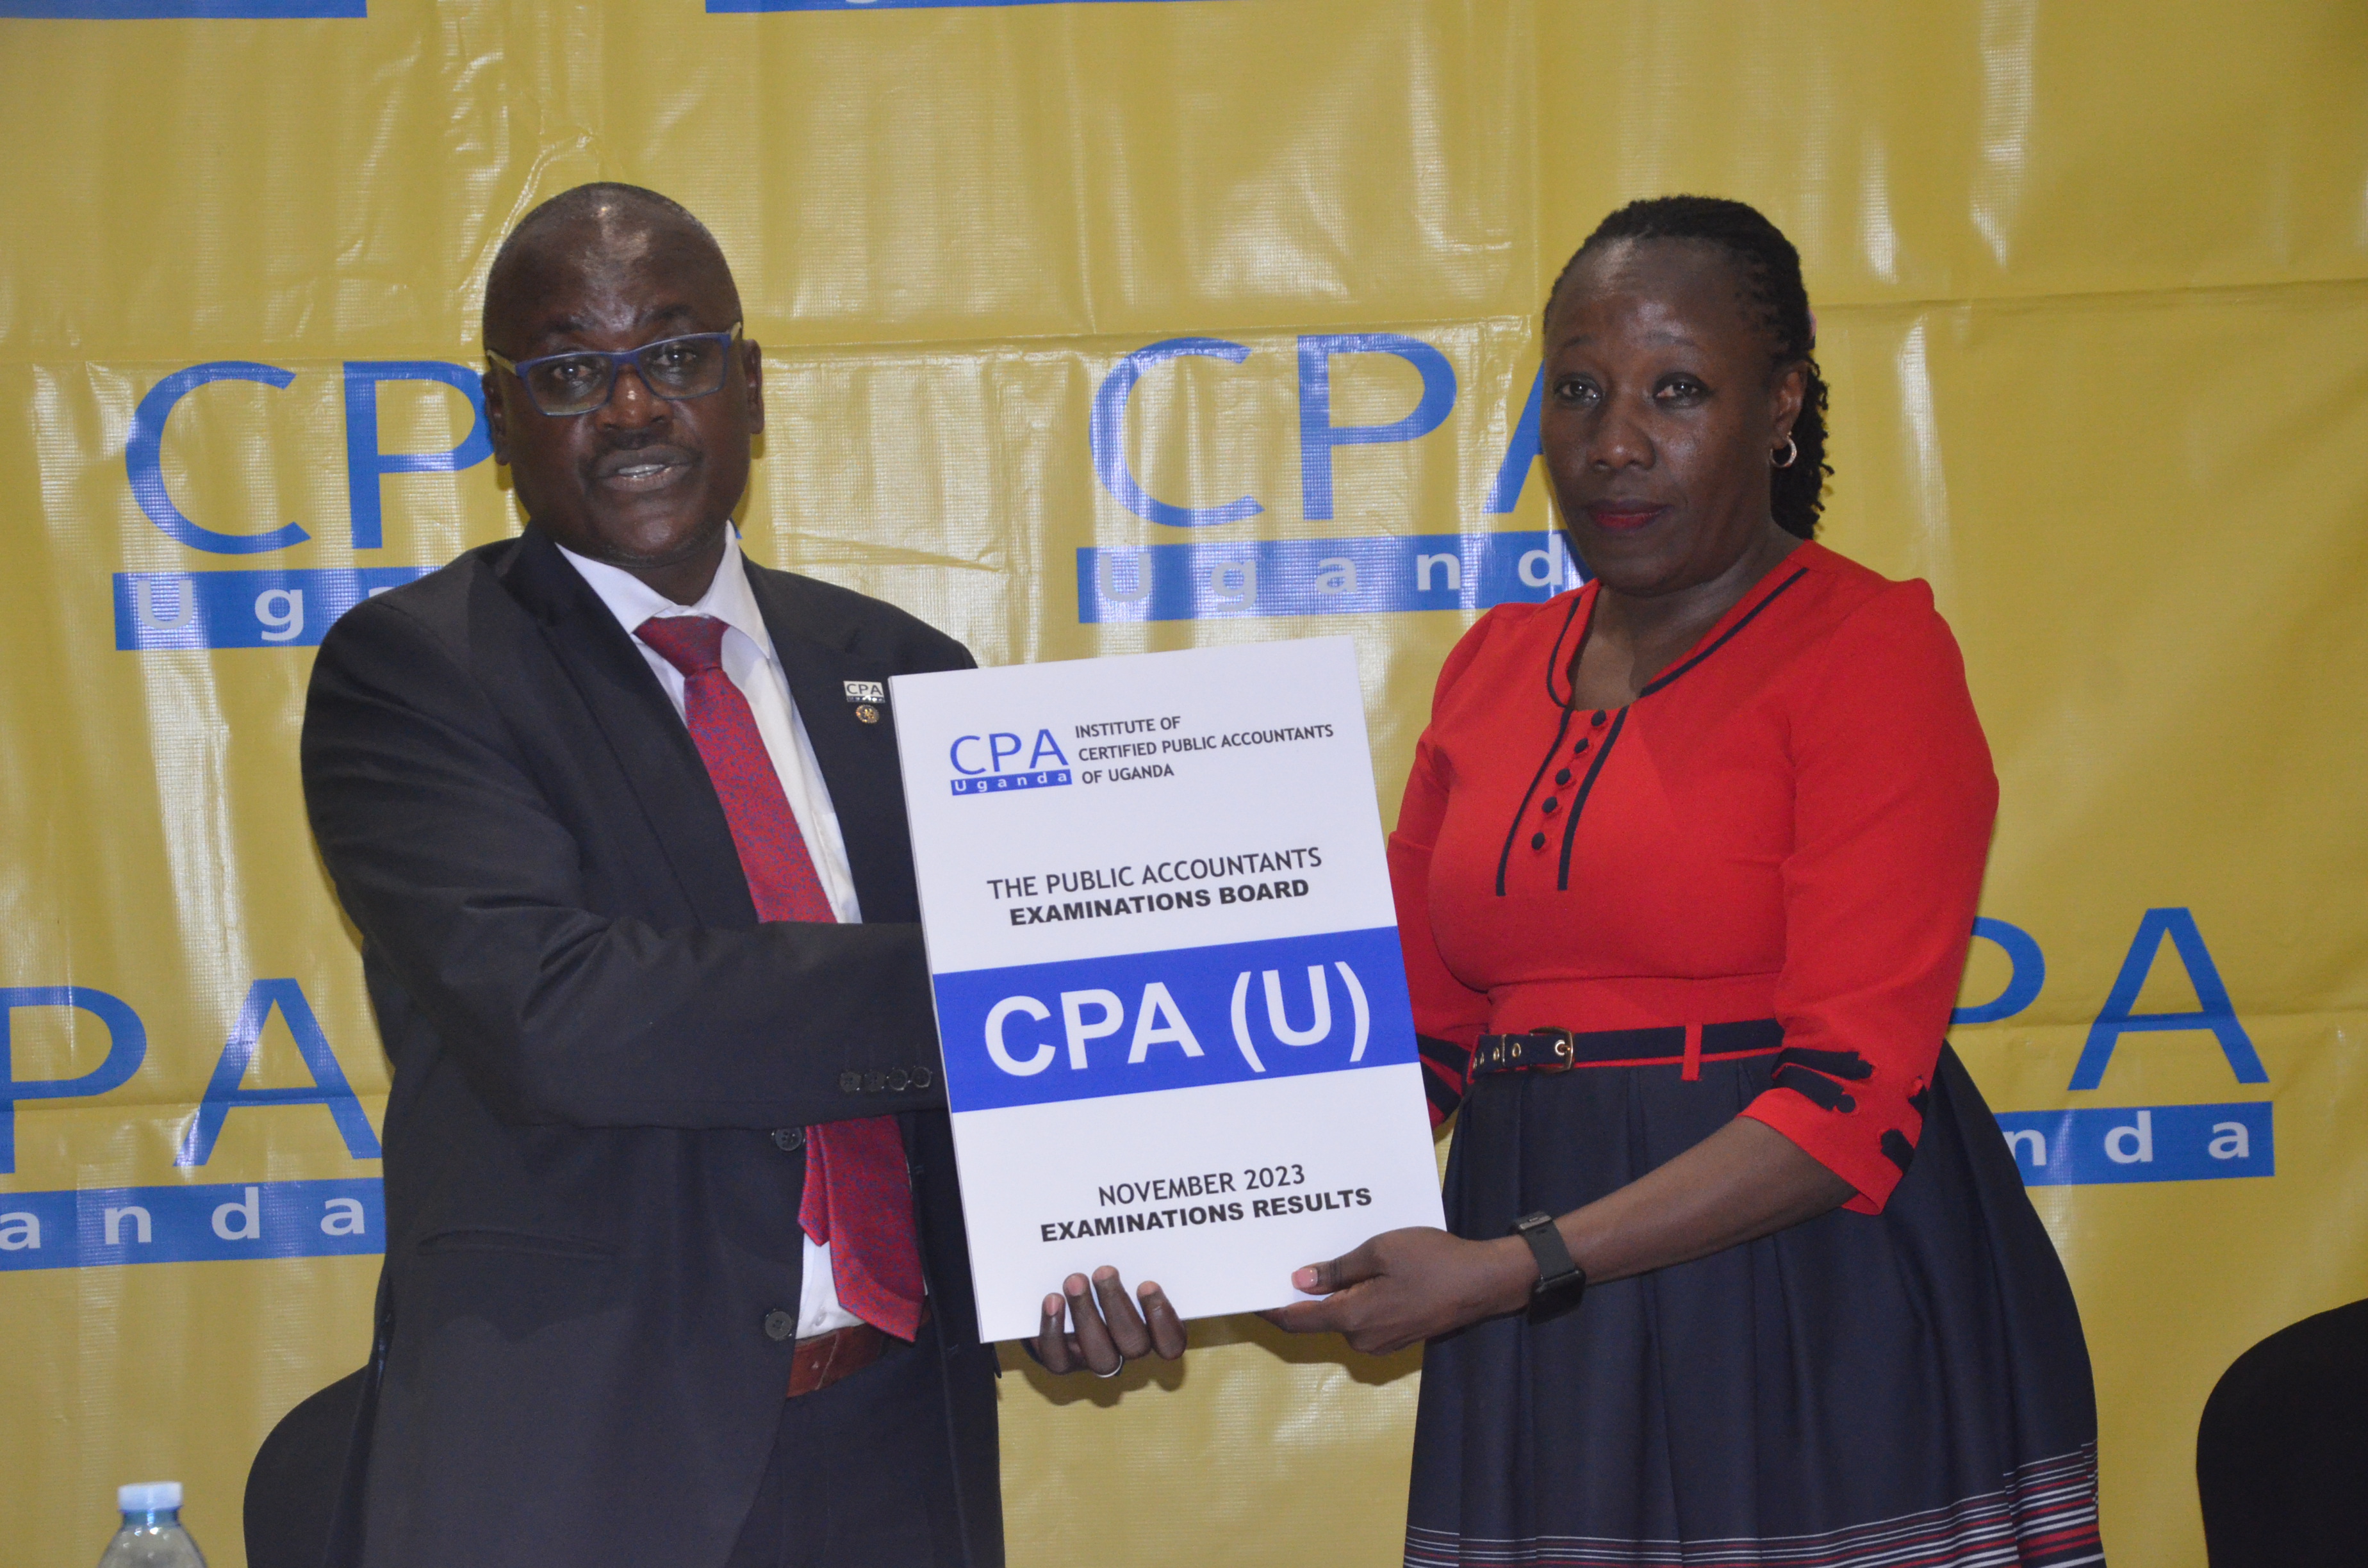 CPA Pro Laura Orobia, Chairperson PAEB  hands over the CPA (U) November Examinations 2023 results to Ronald Mutumba, Vice President of ICPAU